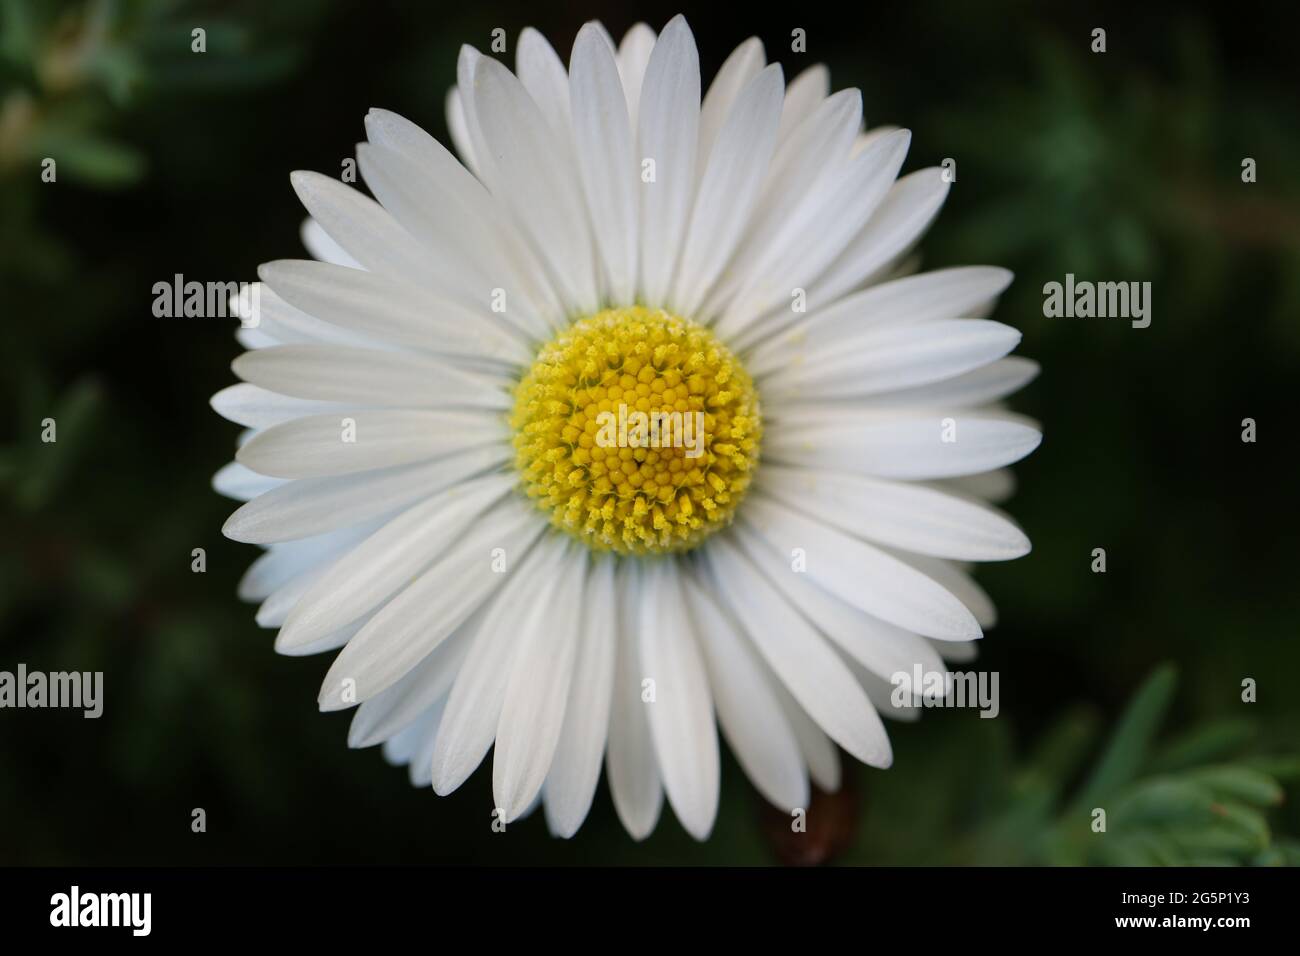 White common daisy with  yellow stamens  and green leaves,  spring daisy in the garden, flower head macro, beauty in nature, floral photo, macro photo Stock Photo